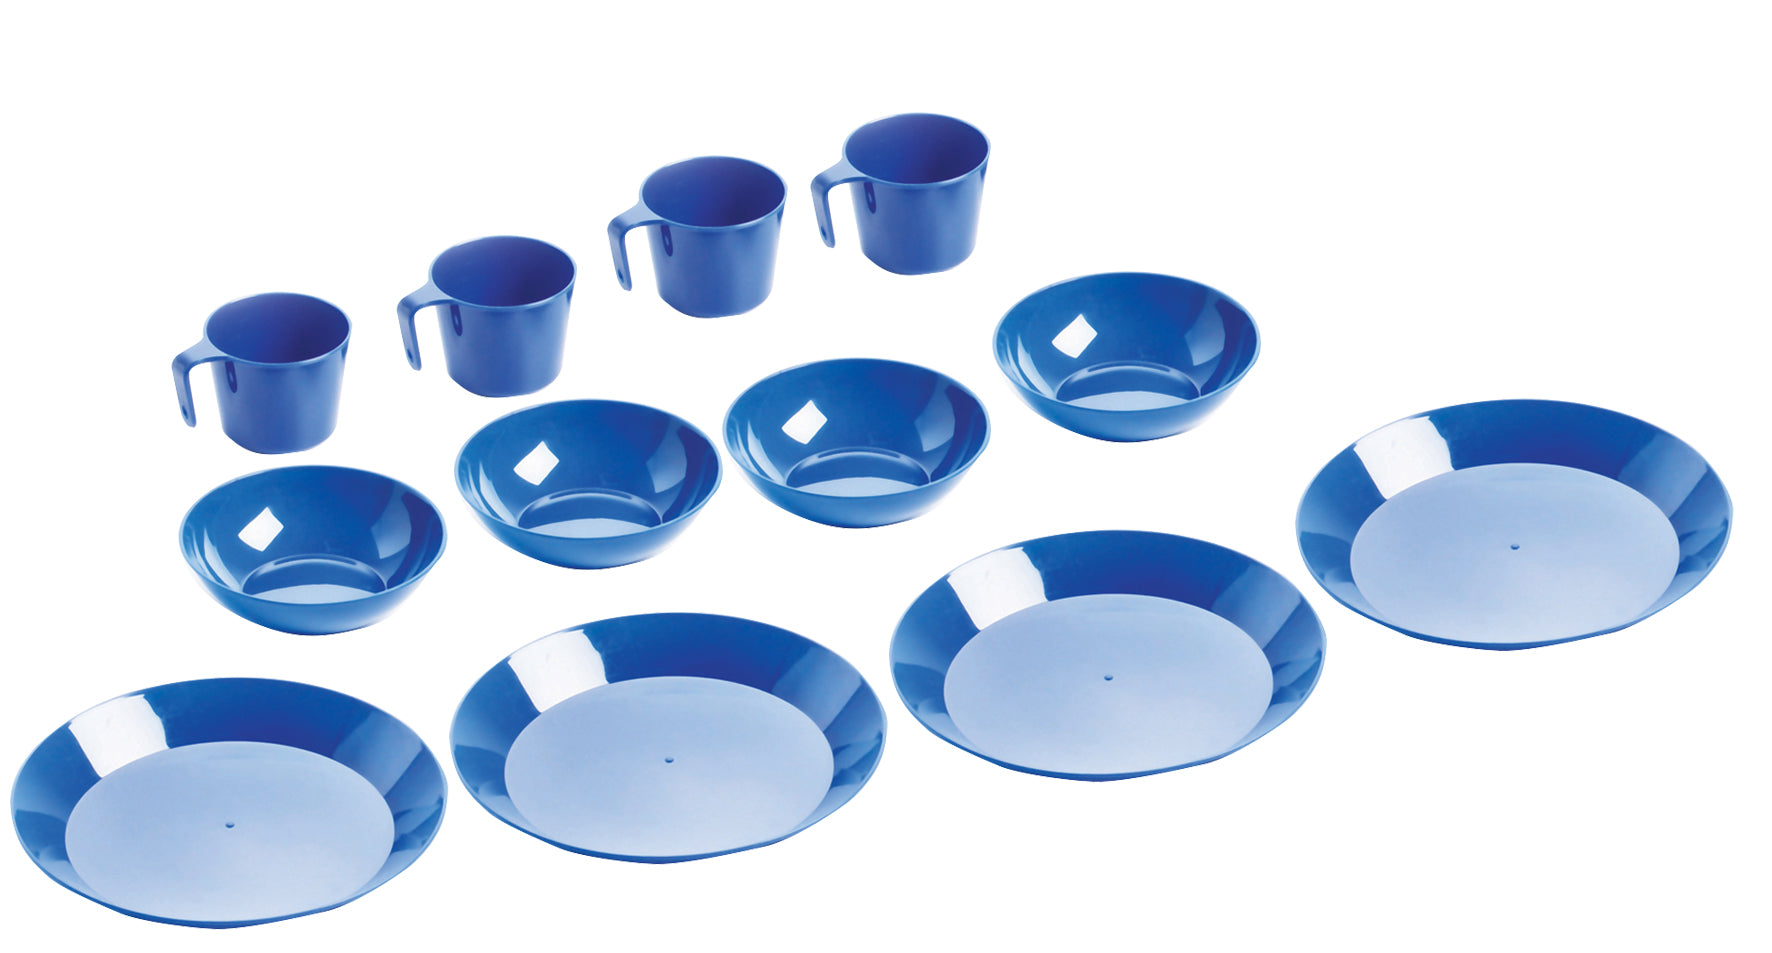 Coghlan's 1210 Campers Tableware Set - 4-Person, Blue